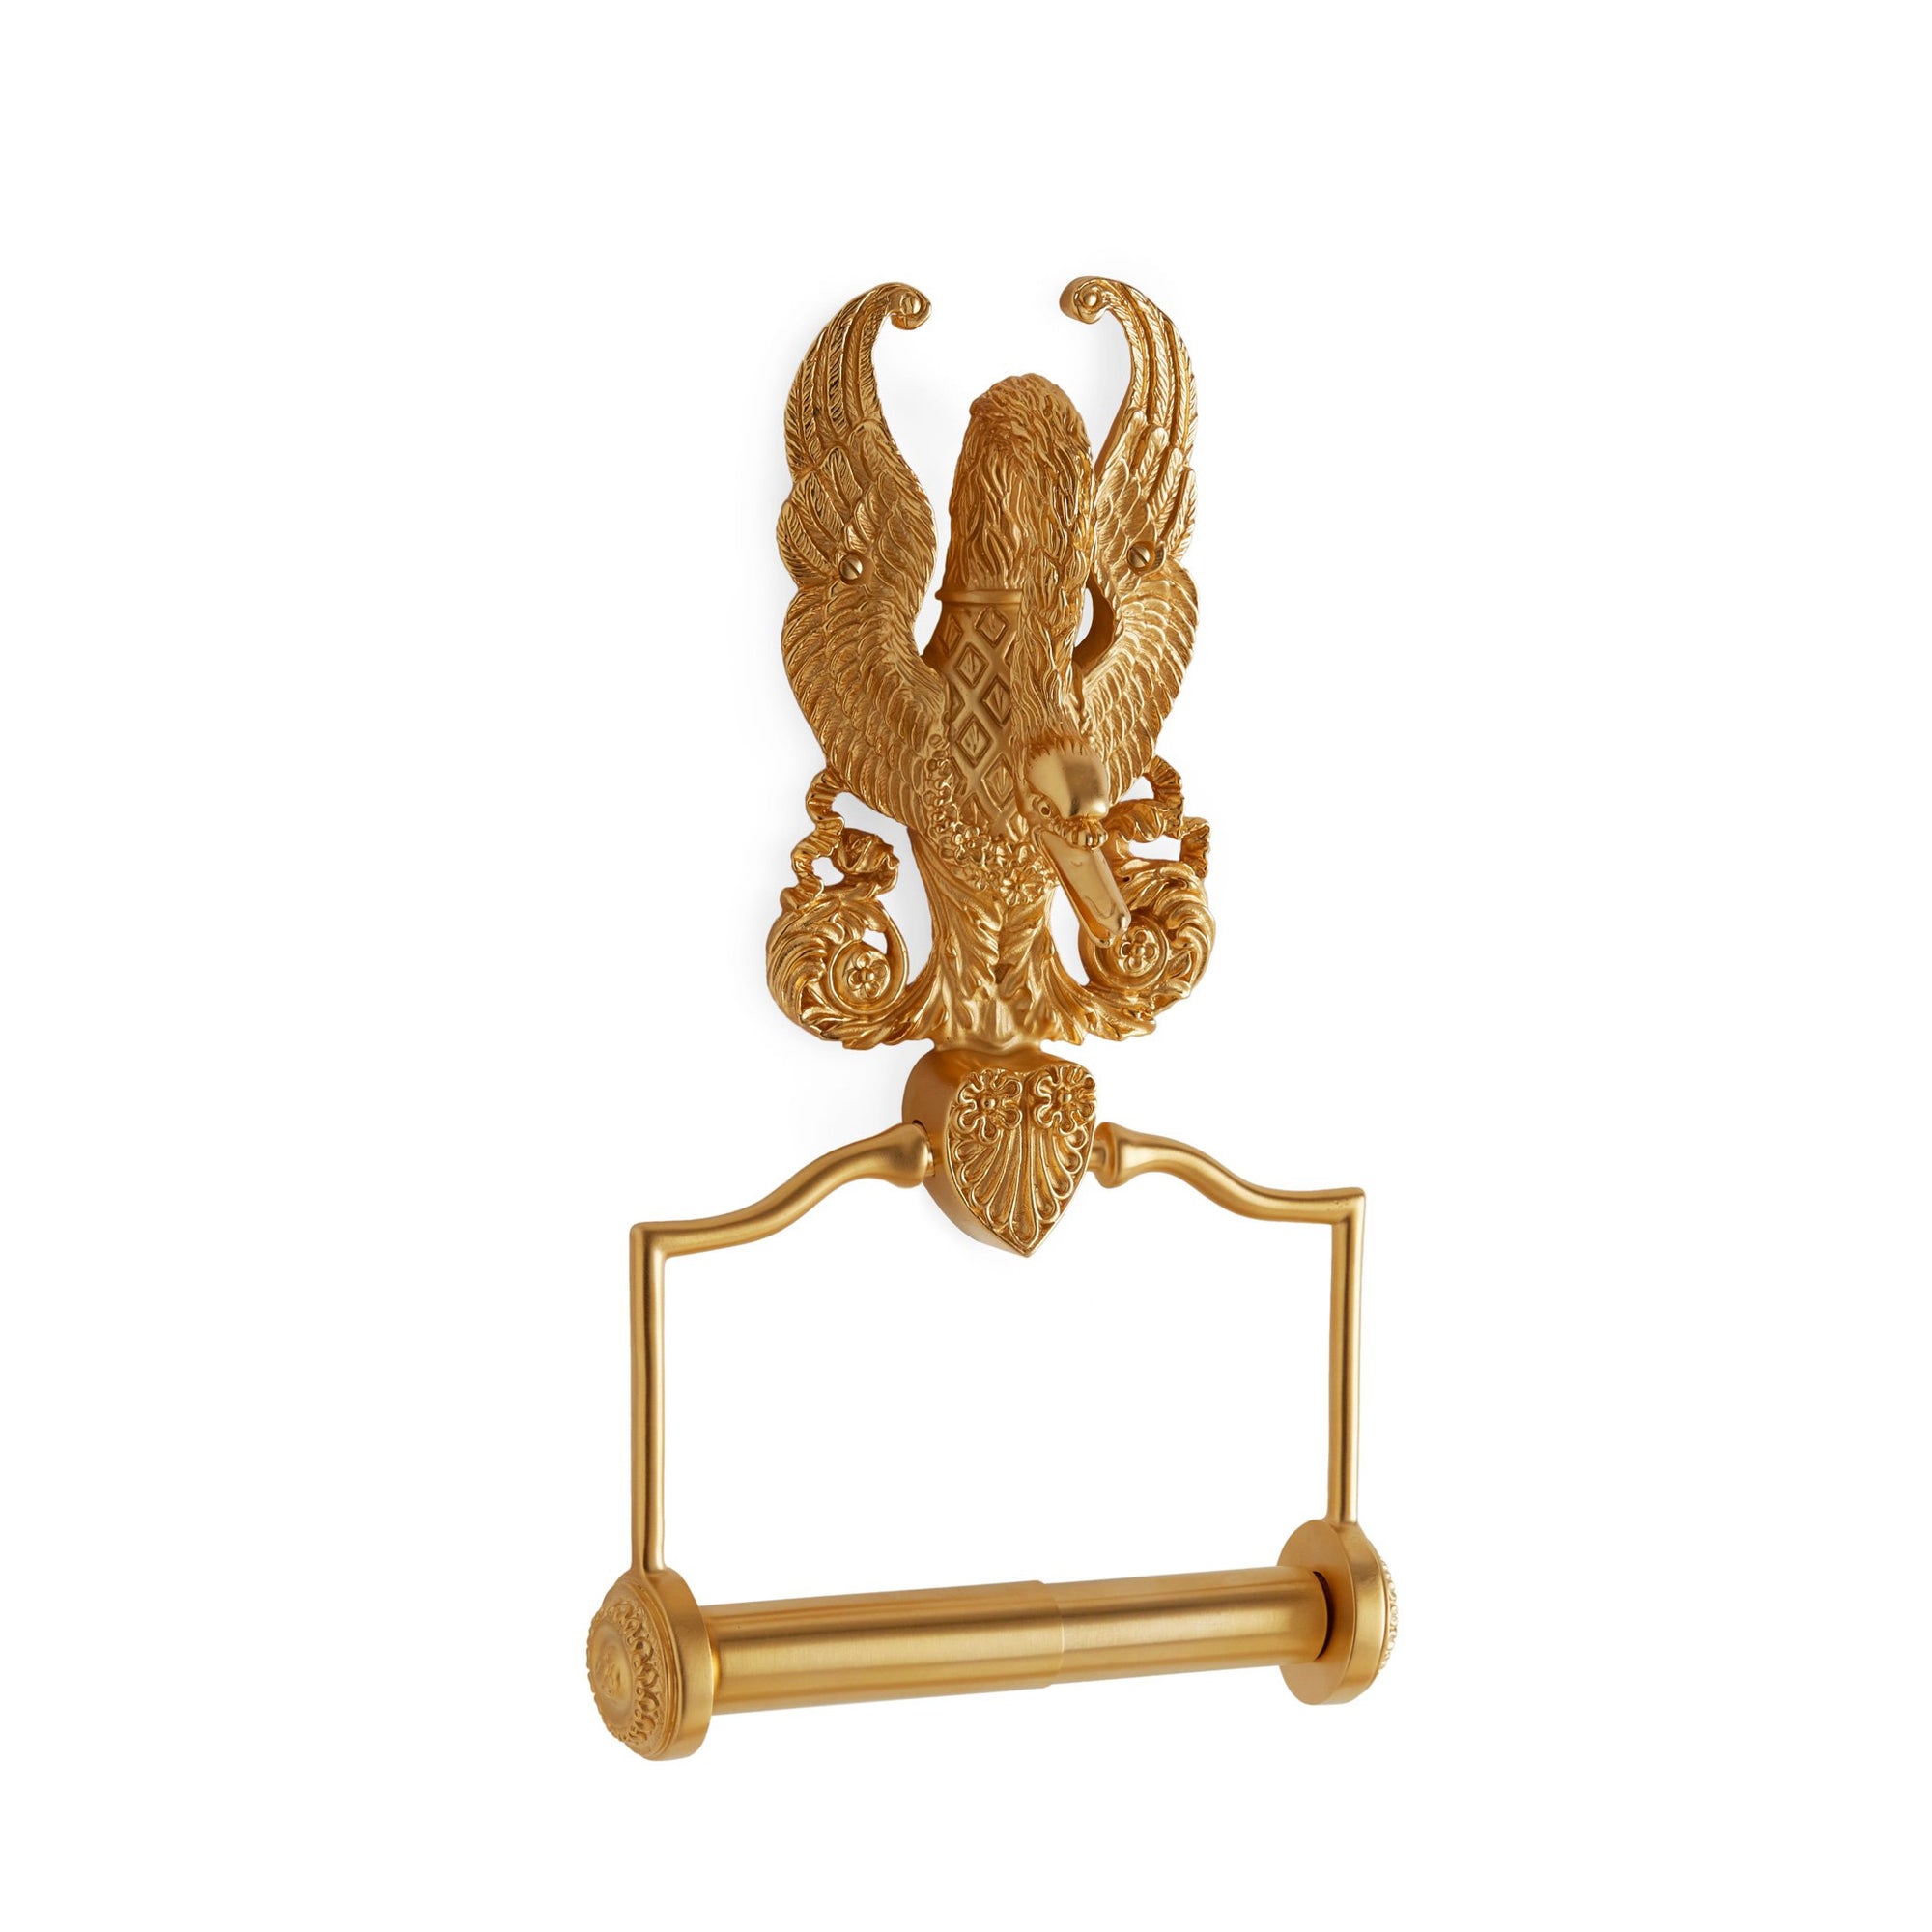 3520-GP Sherle Wagner International Imperial Swan Paper Holder in Gold Plate metal finish